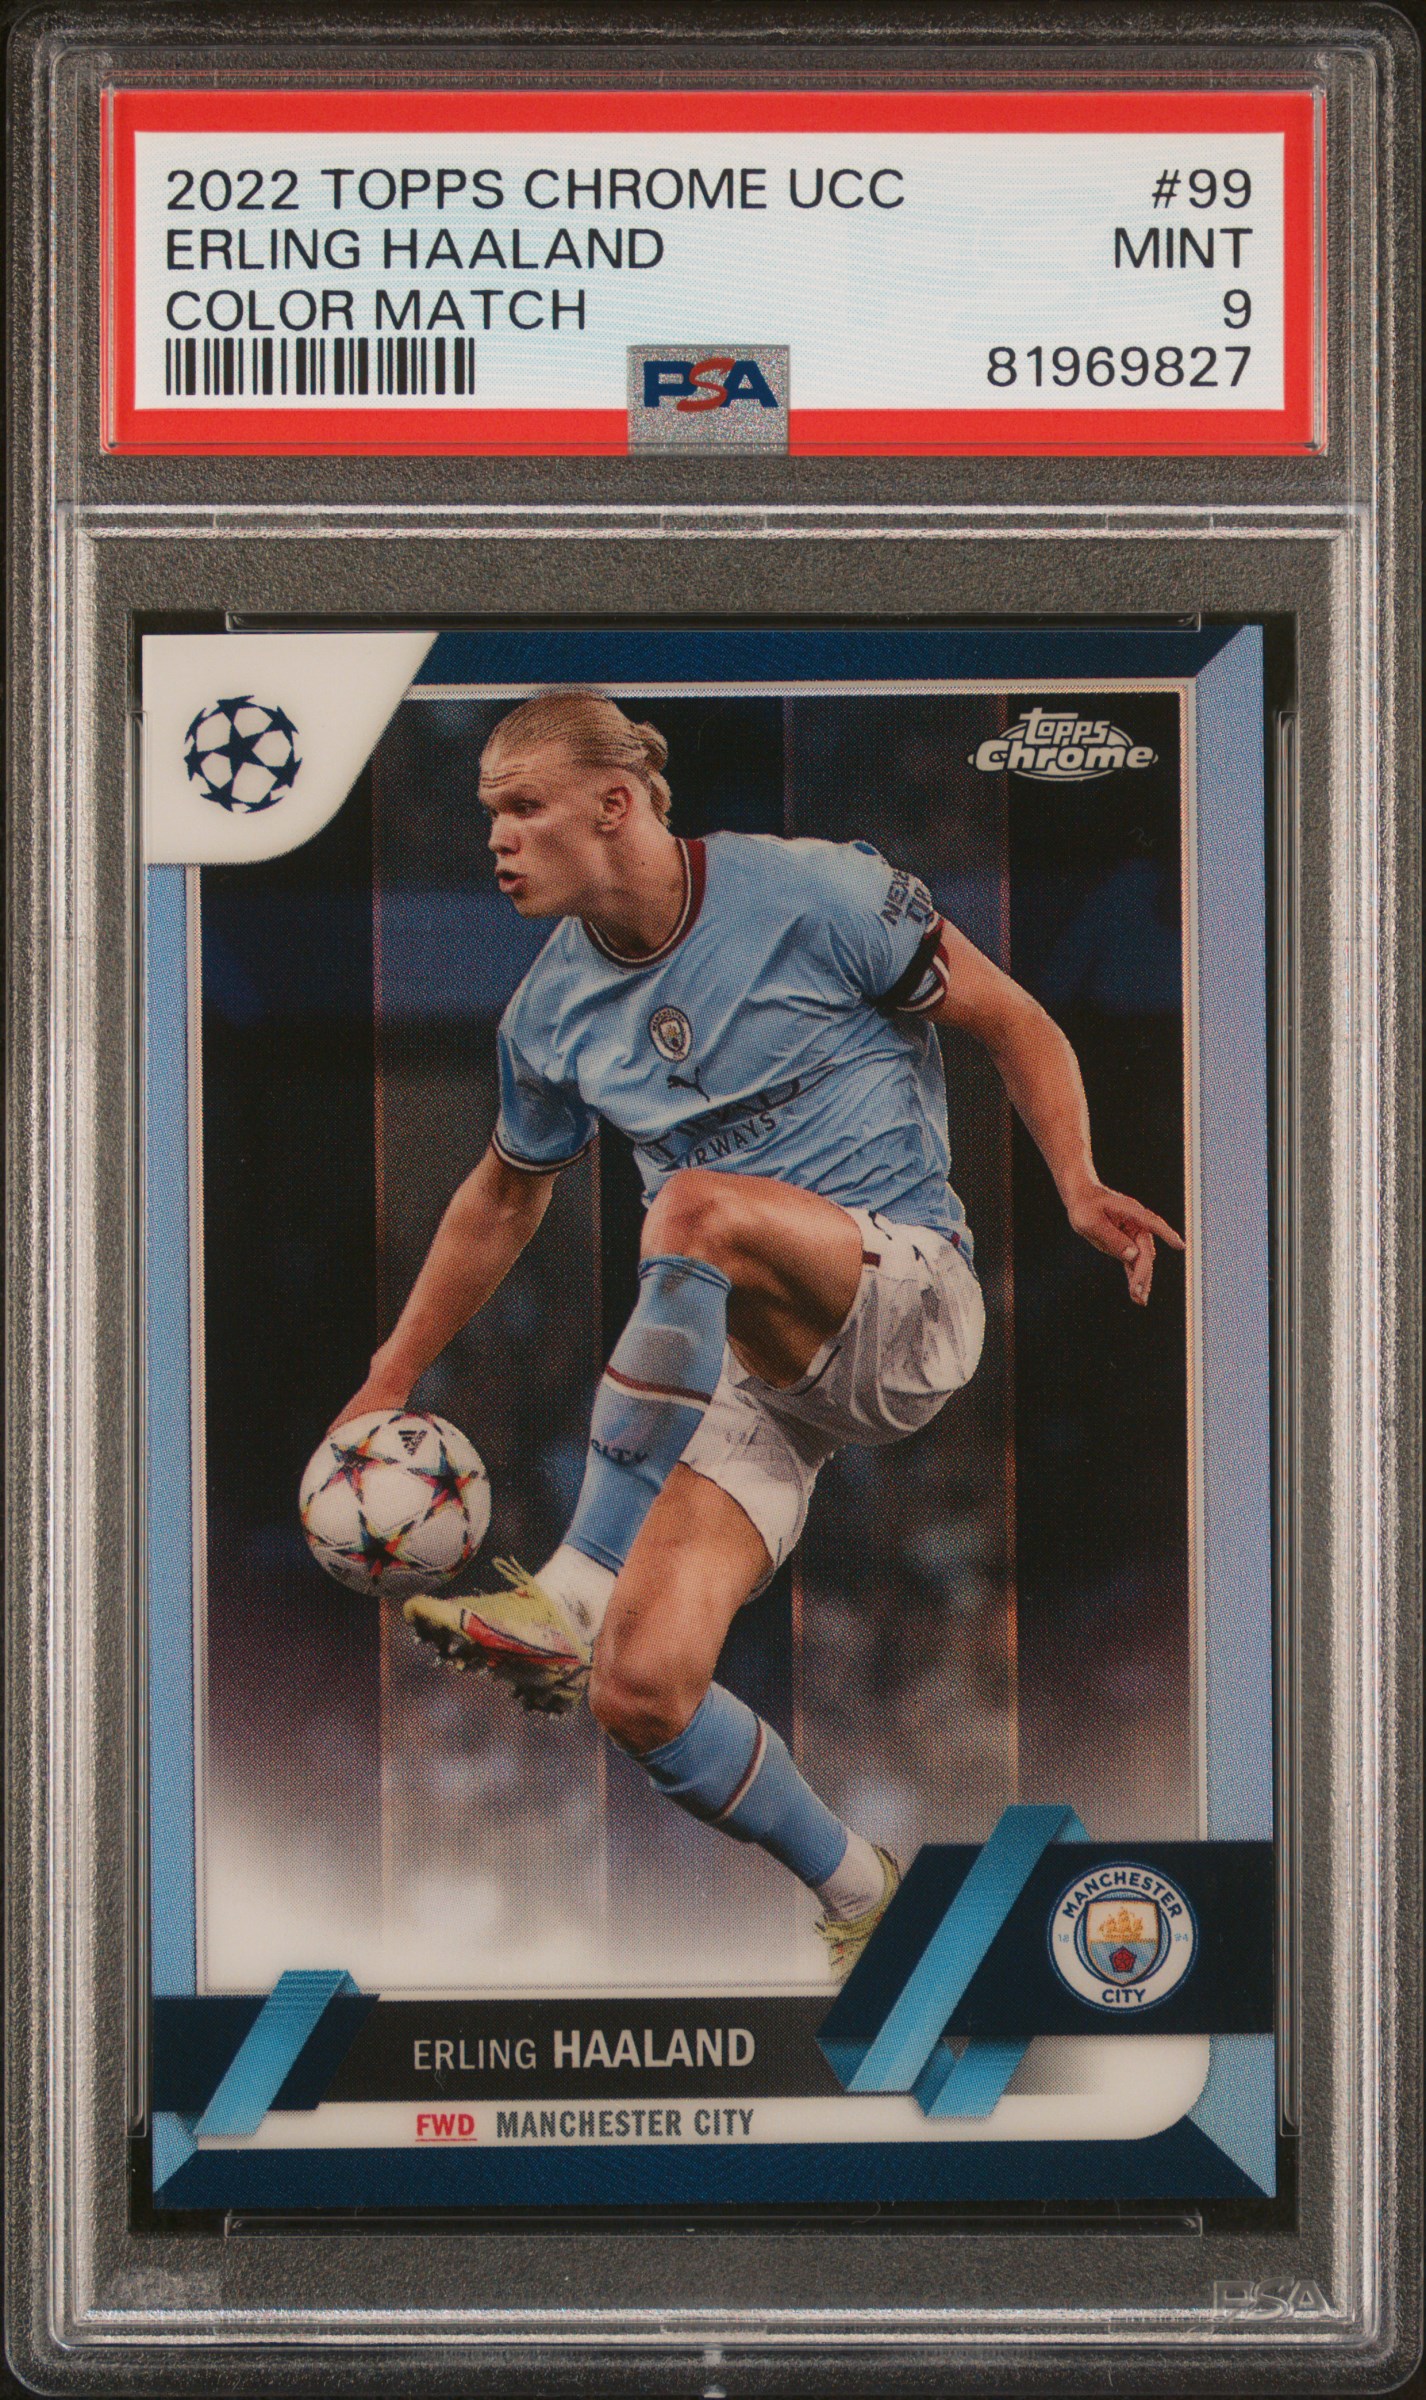 2022 Topps Chrome Uefa Club Competitions Color Match 99 Erling Haaland – PSA MINT 9